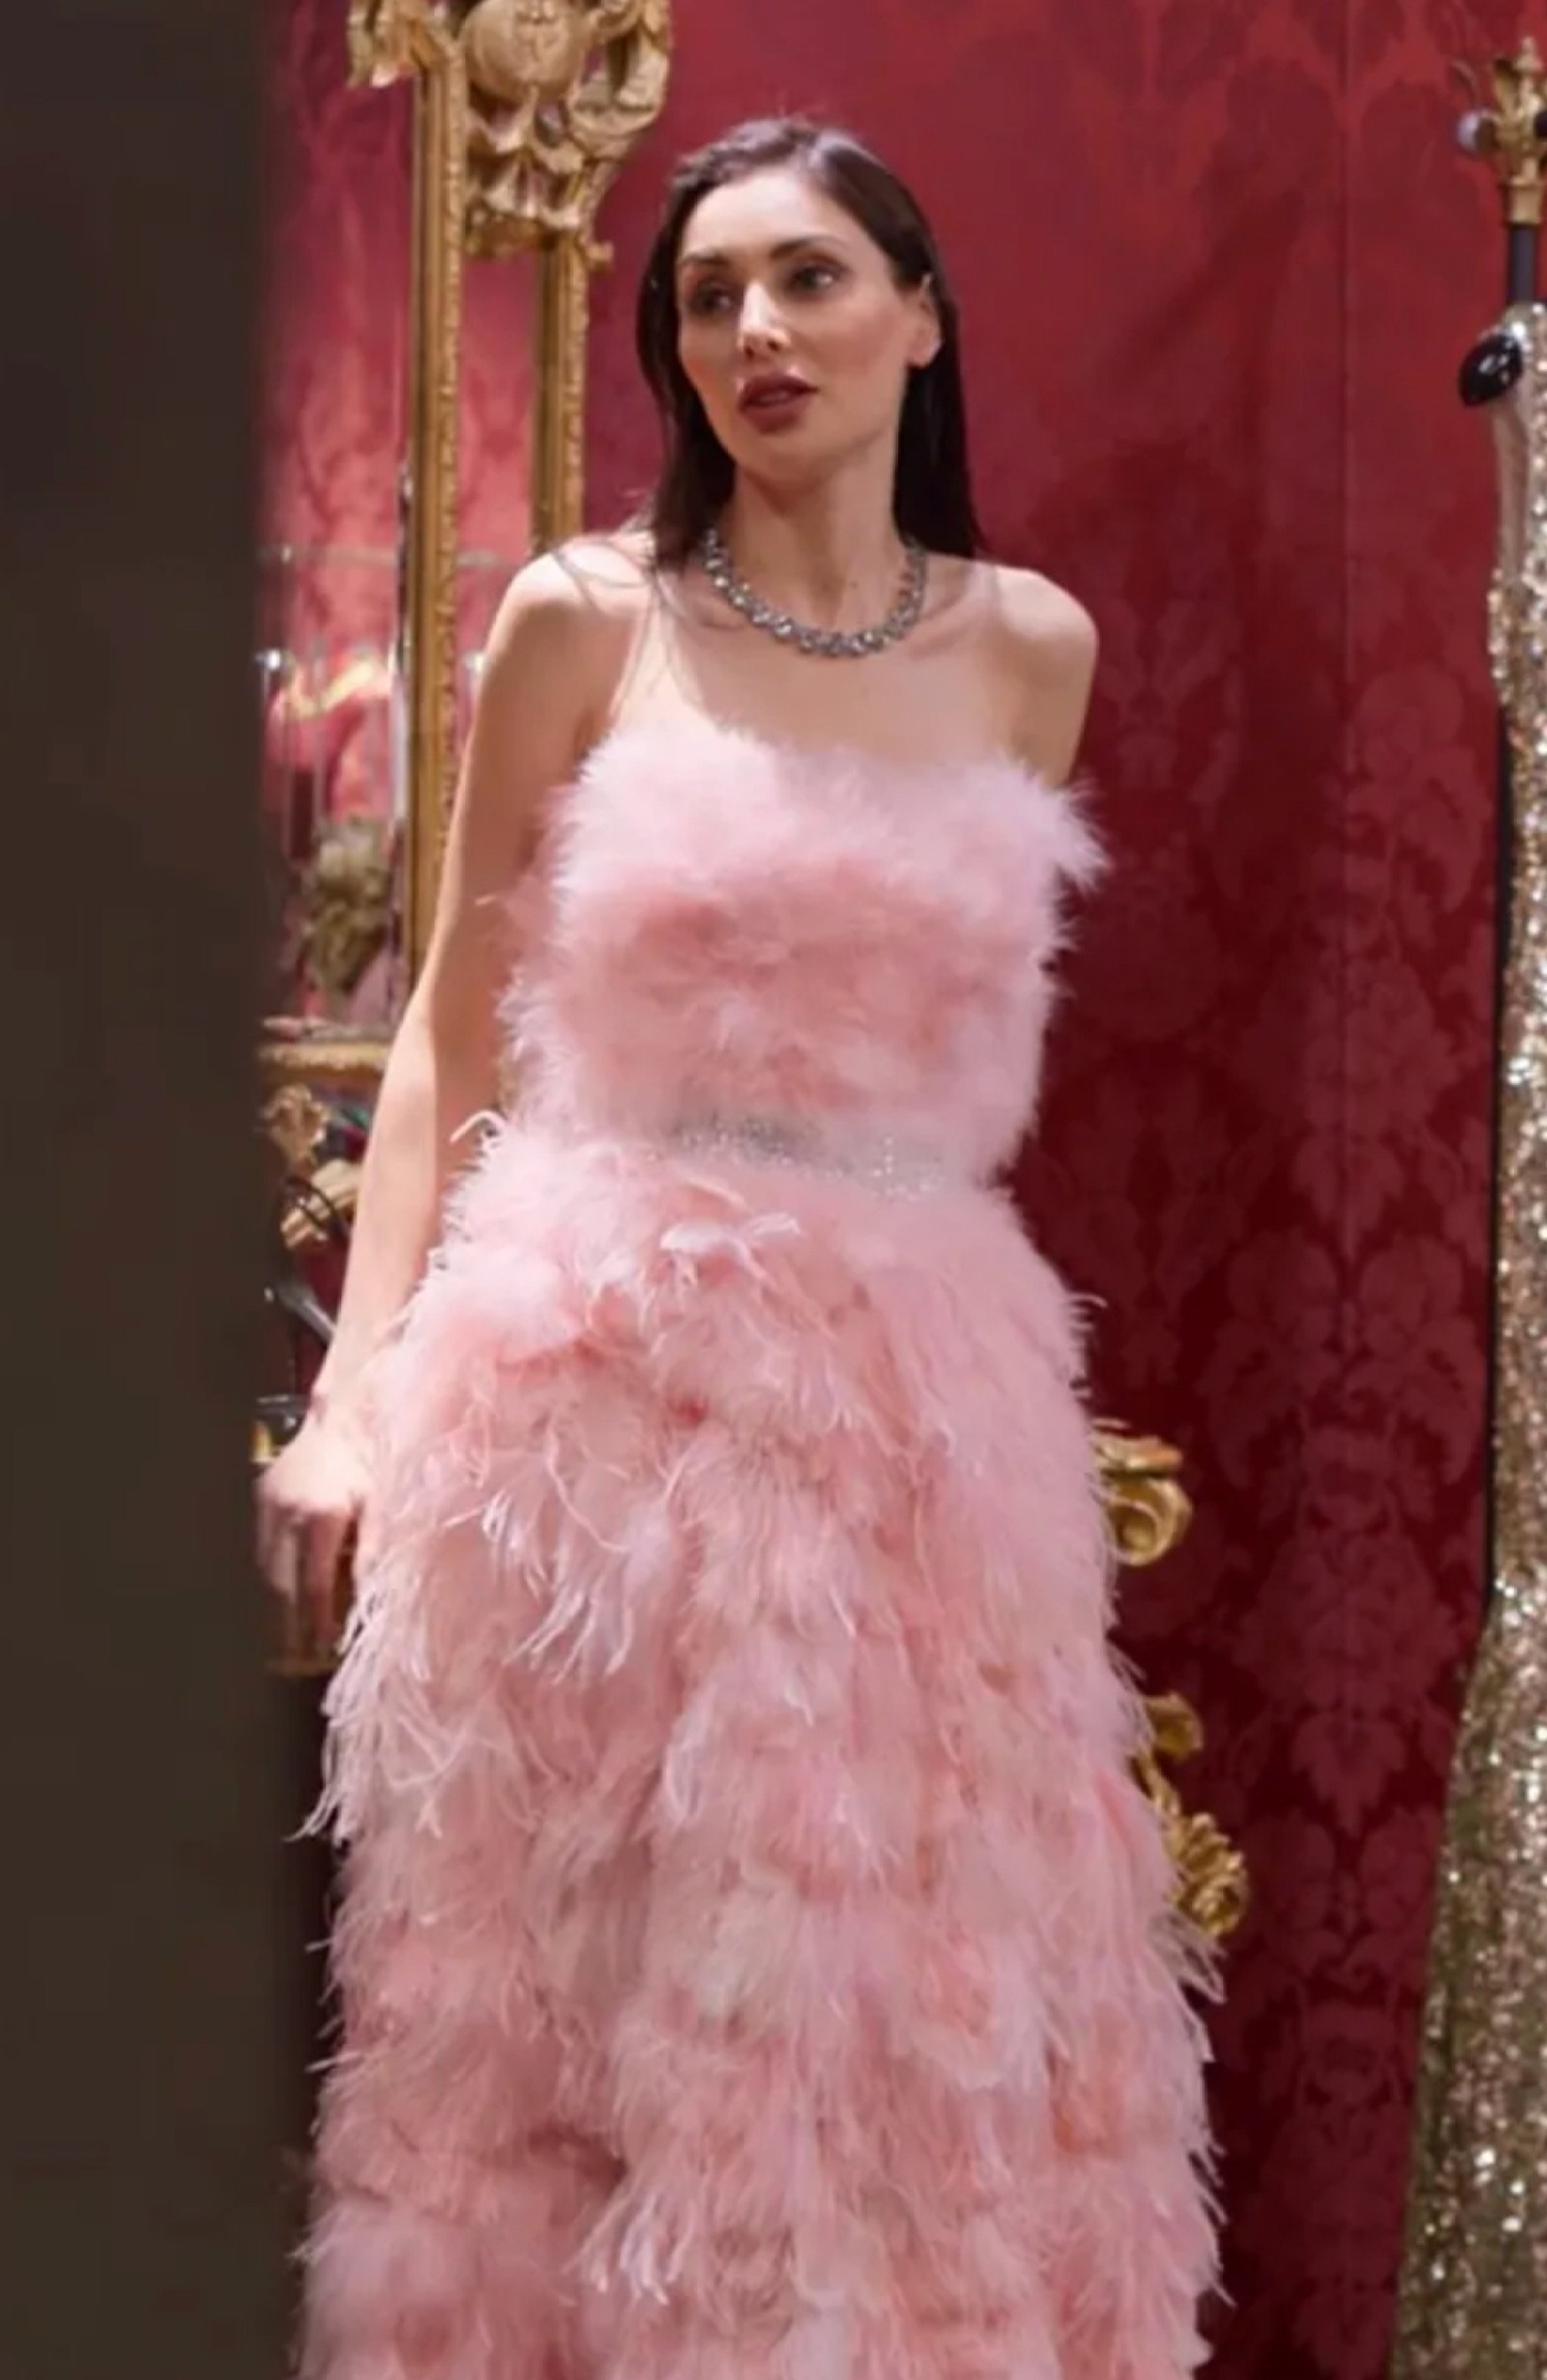 12 most ravishing looks from Bling Empire: New York Season 1: from Tina  Leung's tweed Chanel coat and Deborah Hung's feathery Dolce & Gabbana dress,  to Dorothy Wang's sequinned Oscar de la